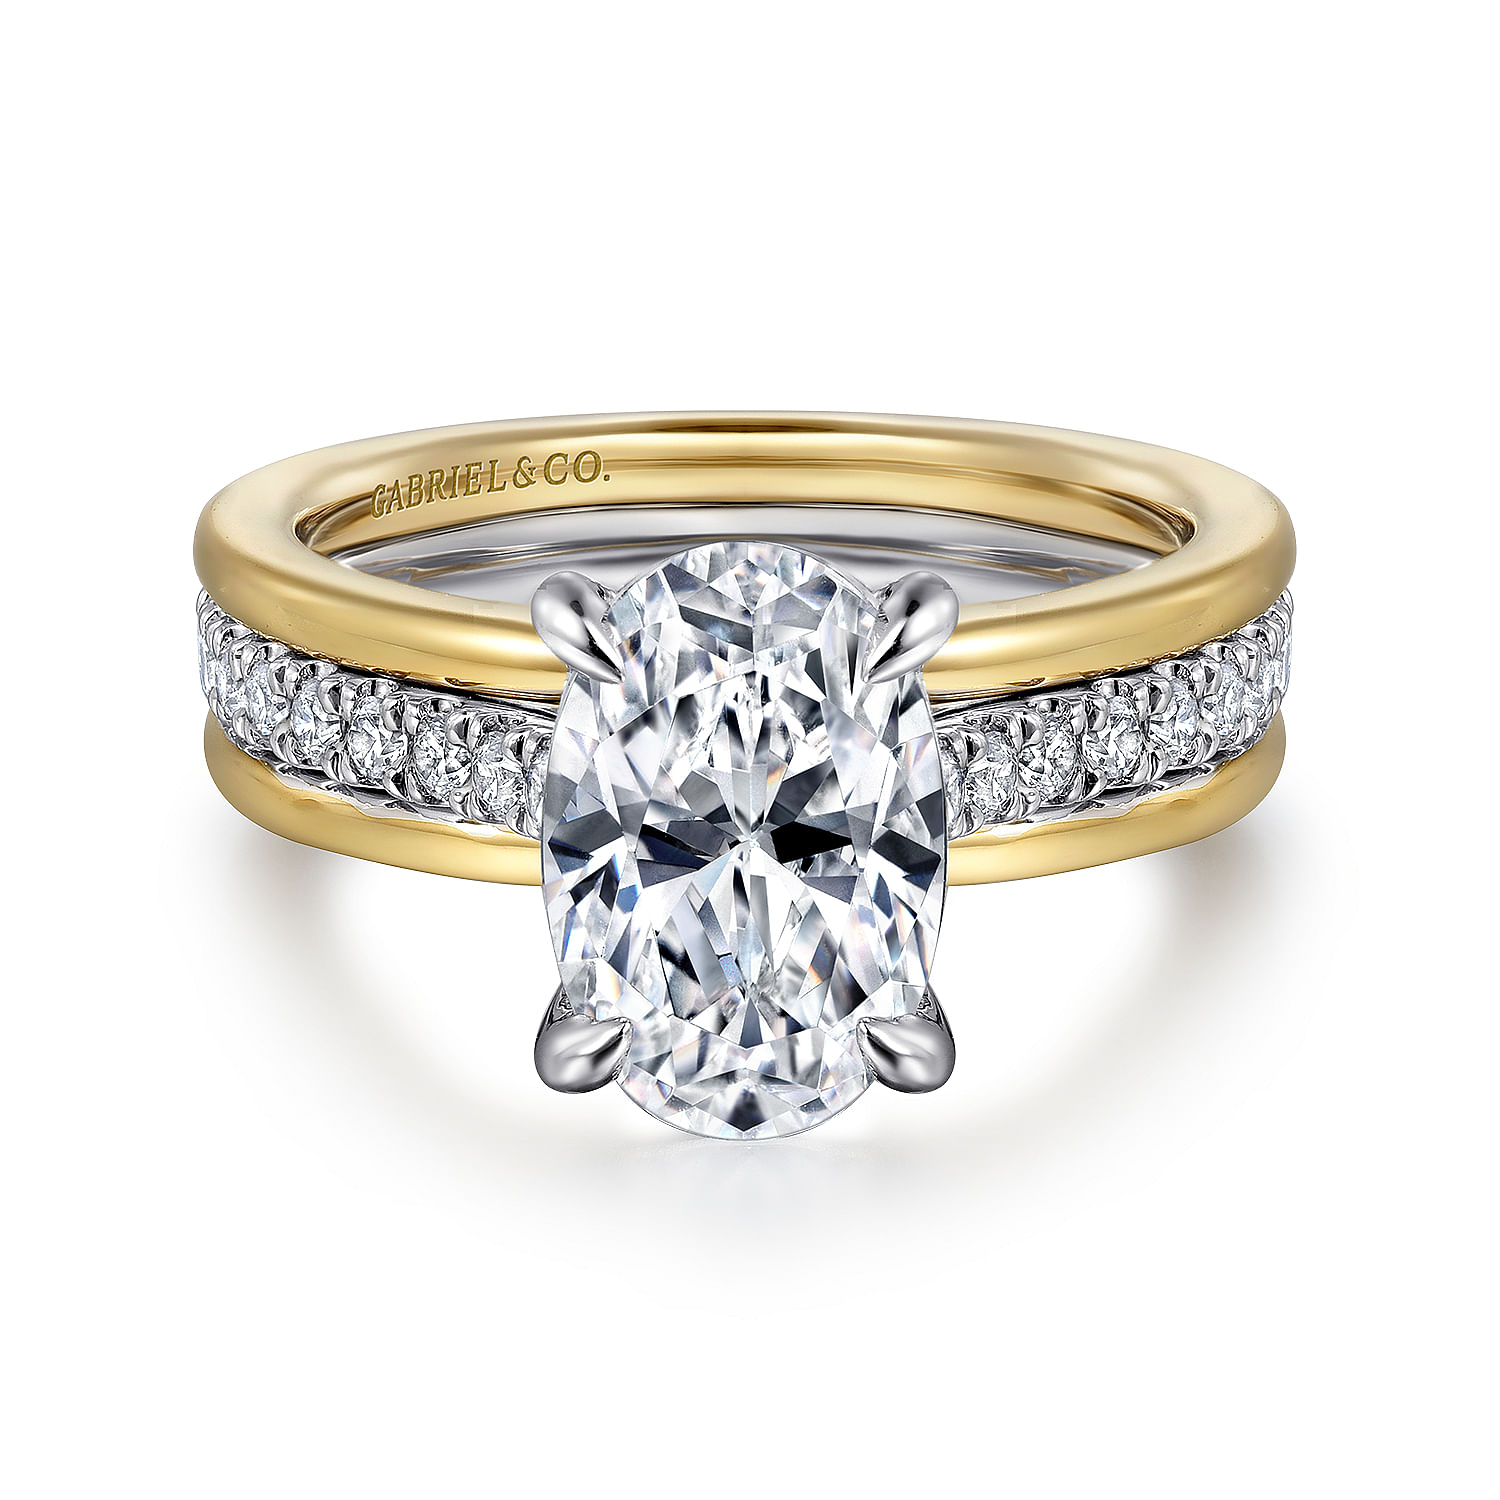 Boutique Engagement Rings - High-End Wedding Rings - Gabriel & Co.